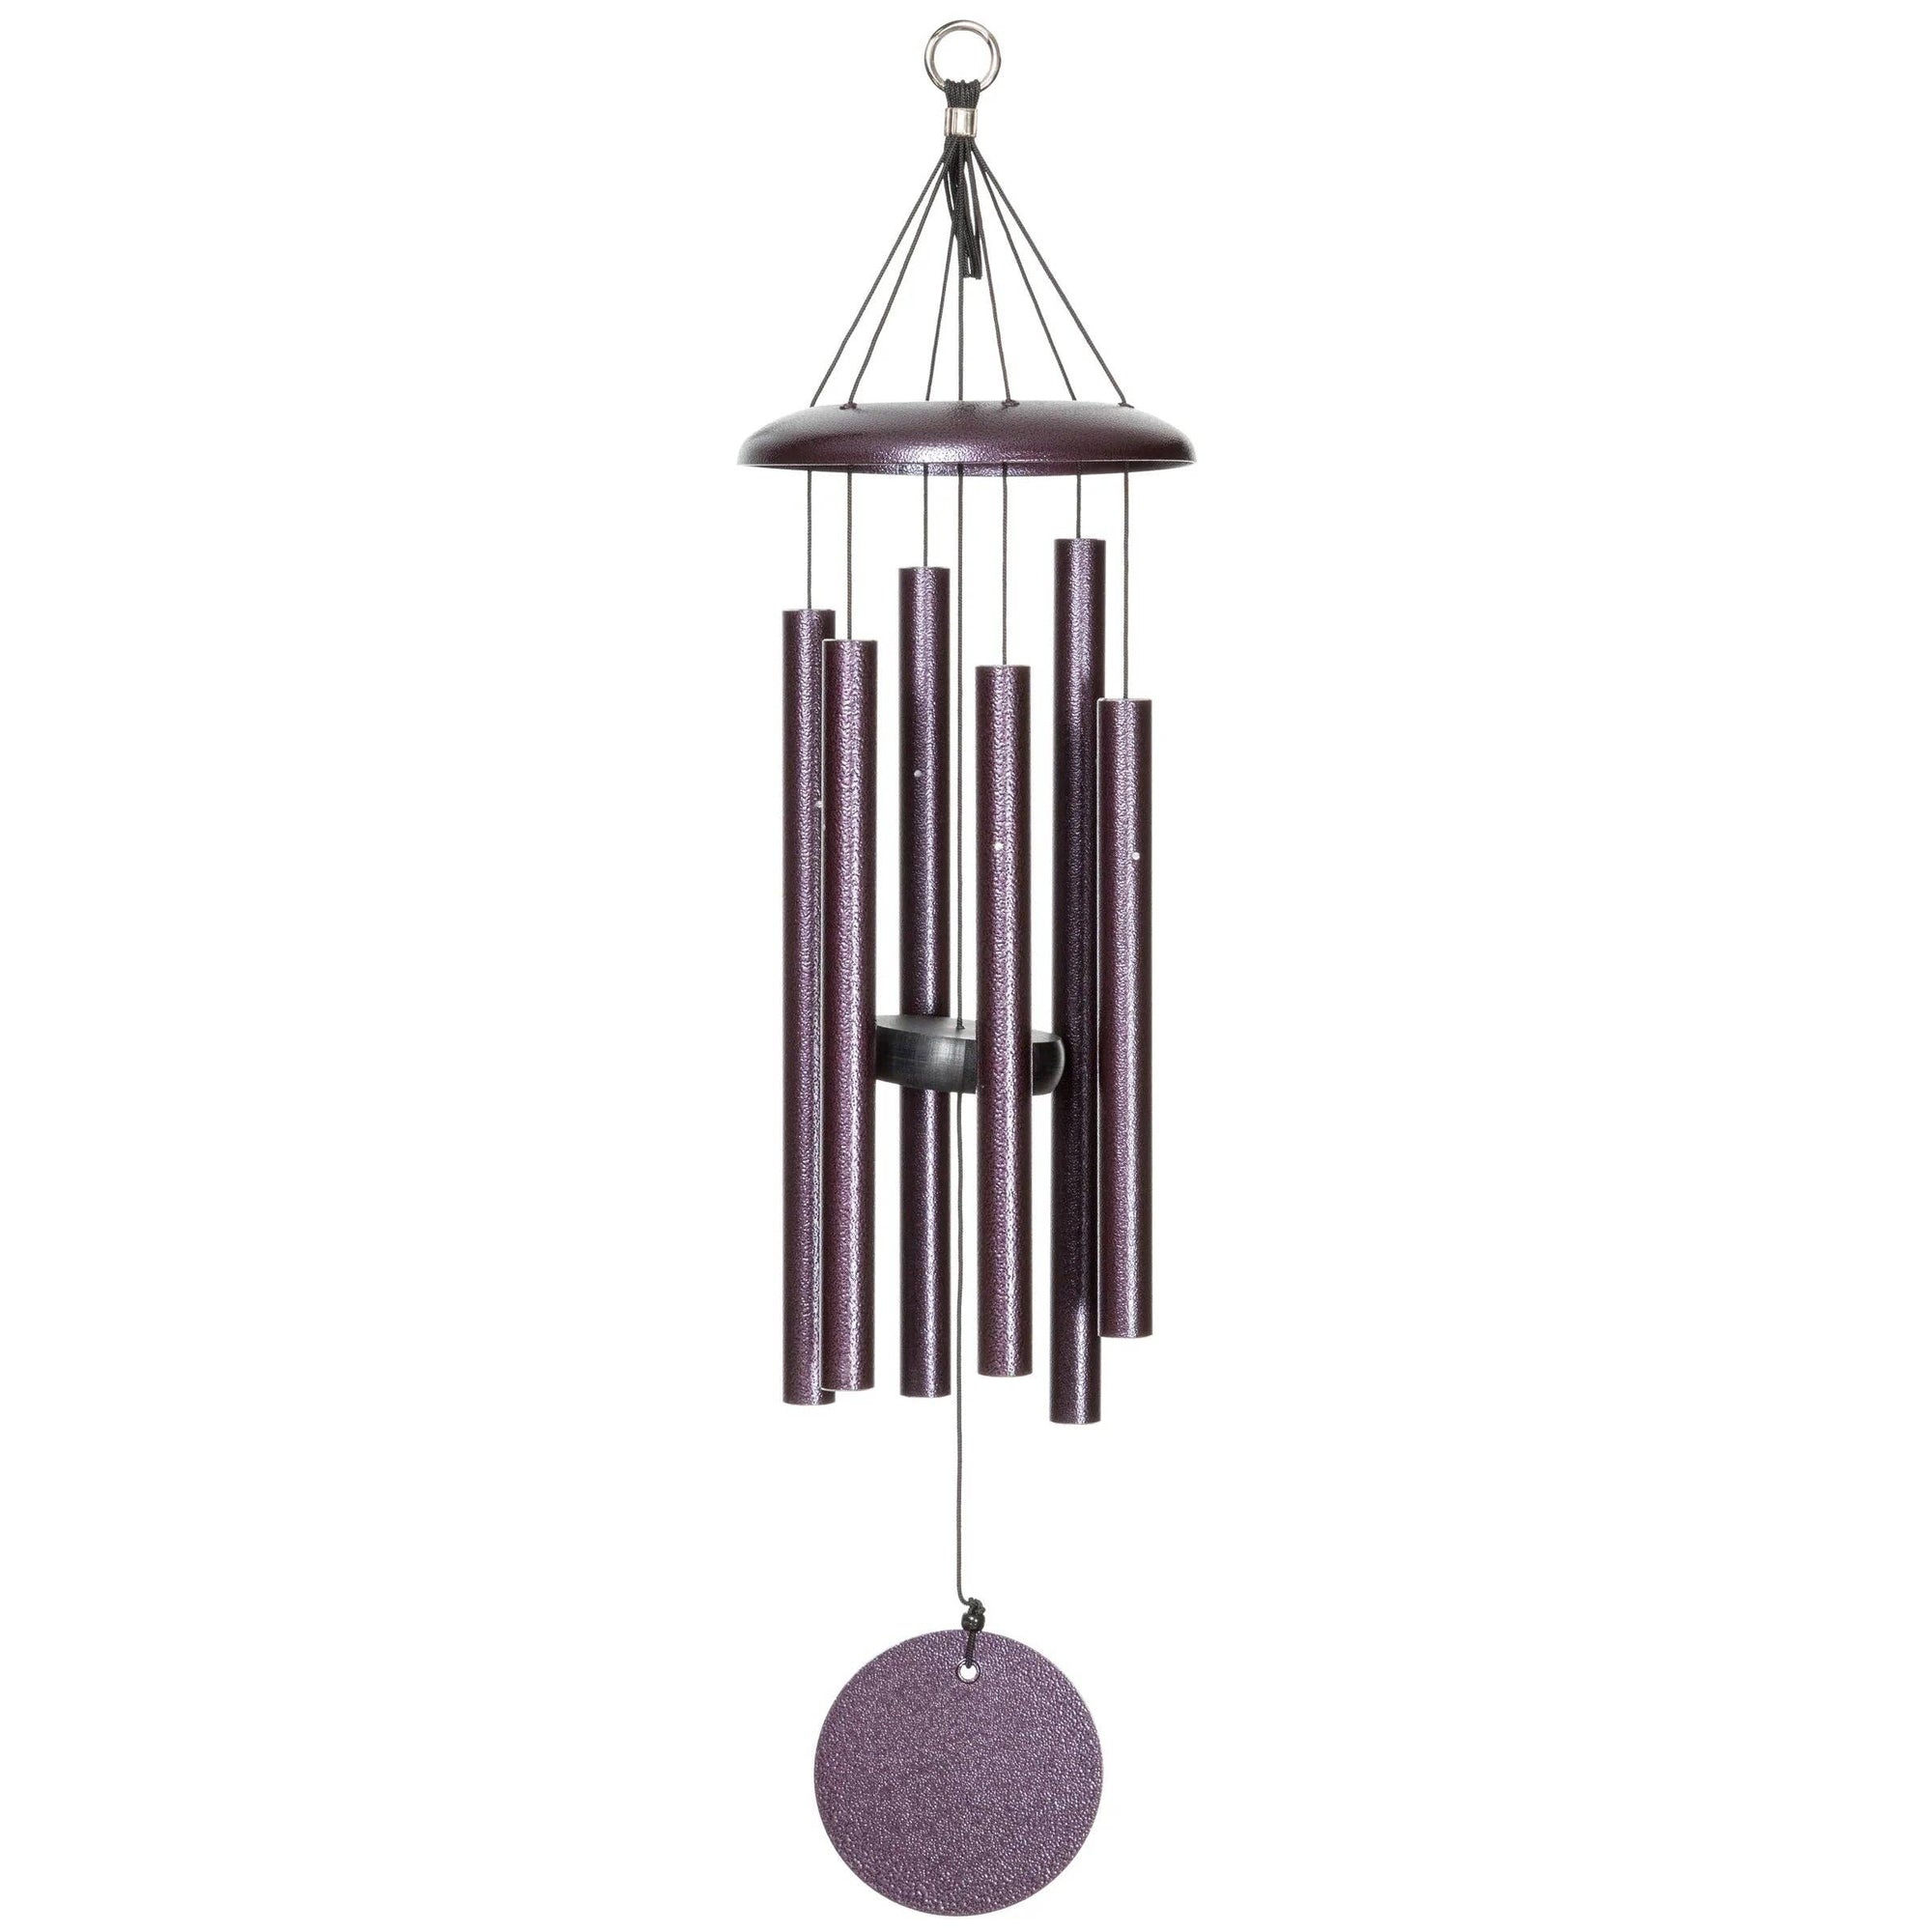 A budget-friendly 27" Windchime Corinthian Bells® with a compact size and circle decor.